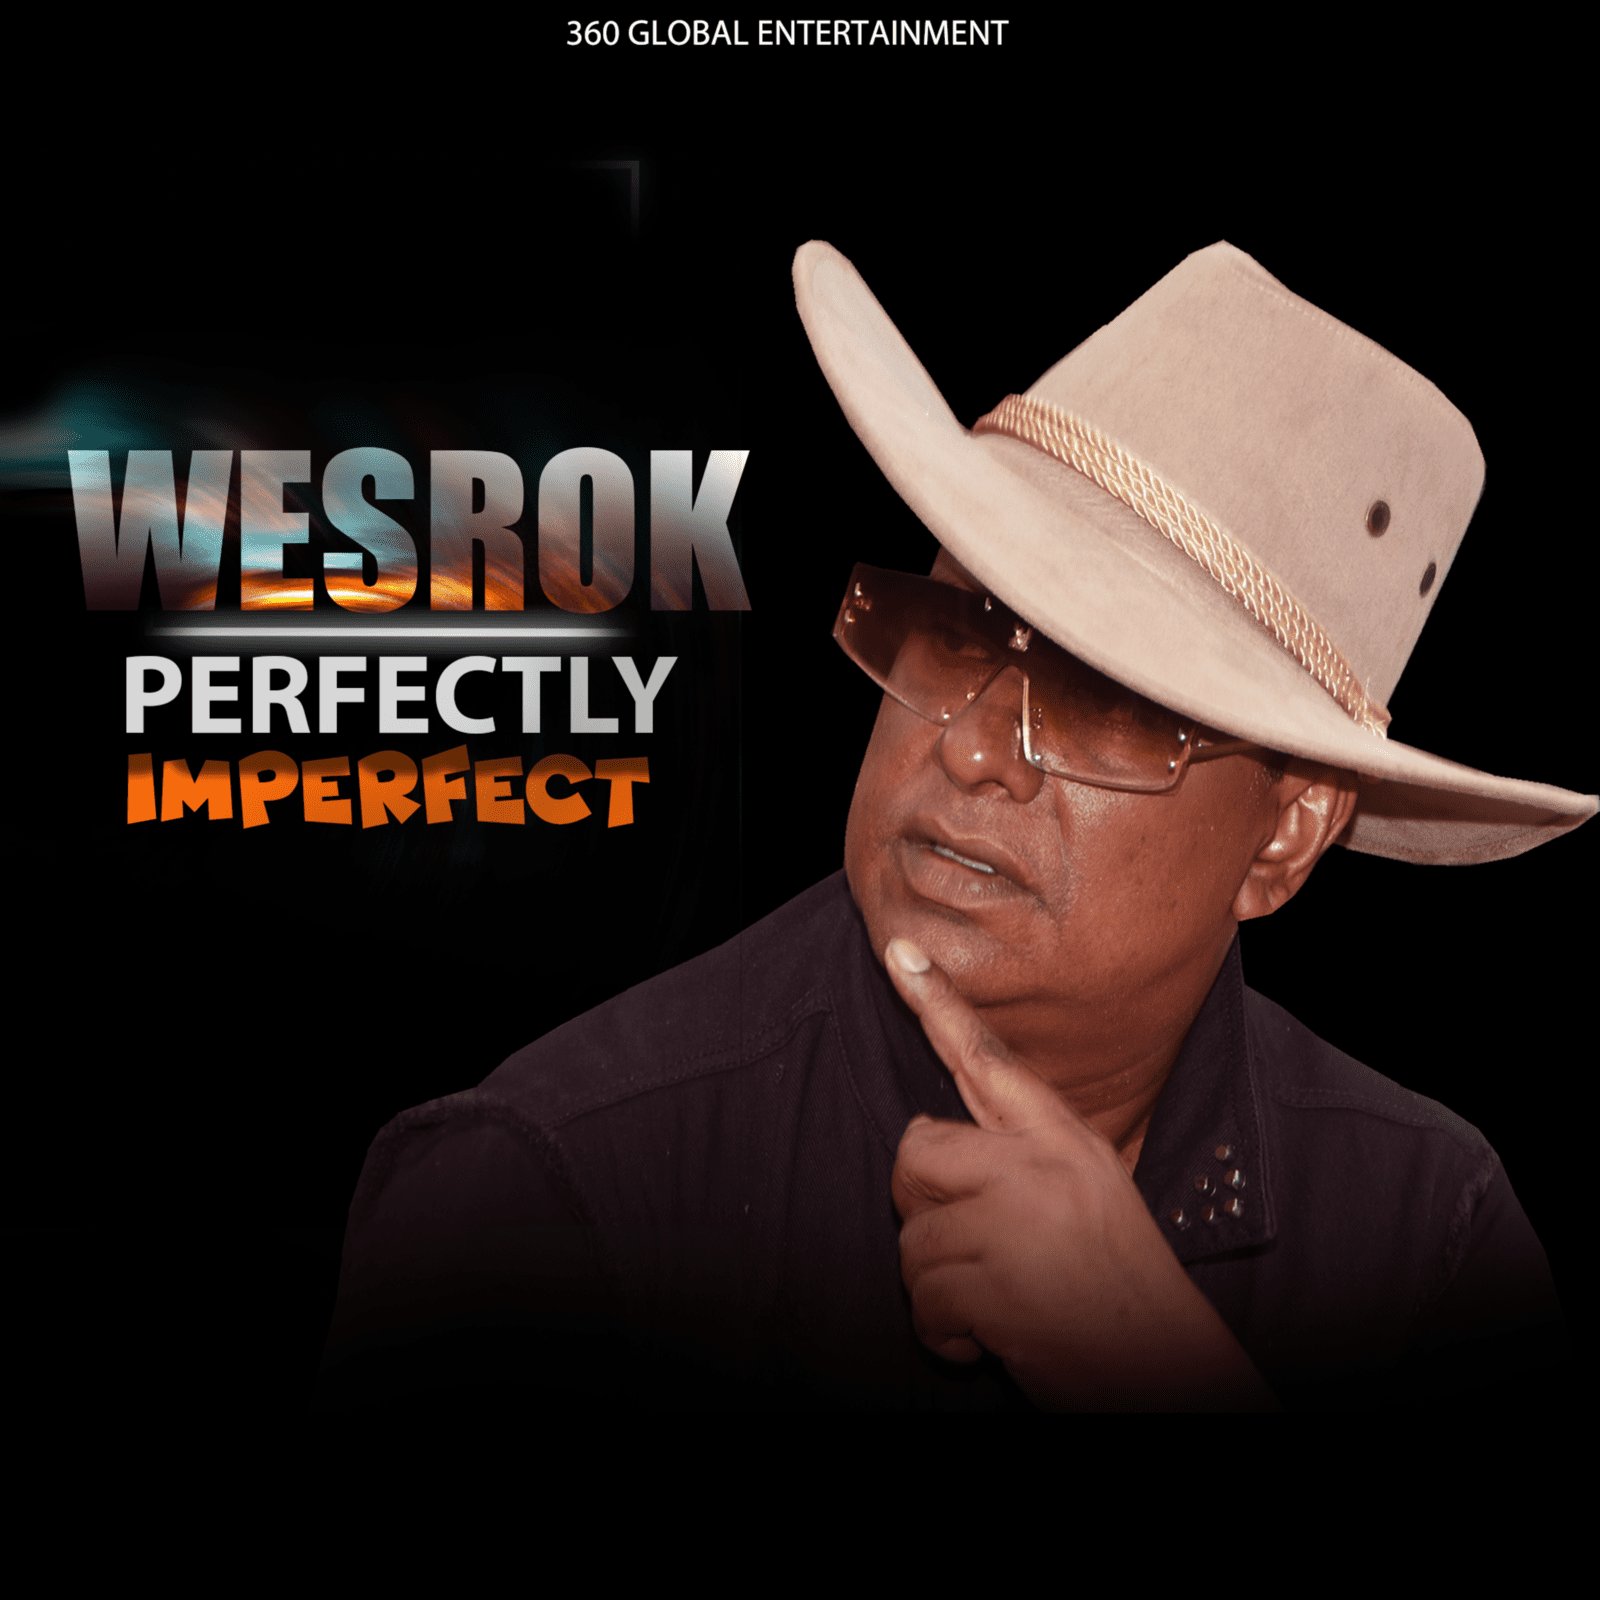 Wesrok - Perfectly Imperfect